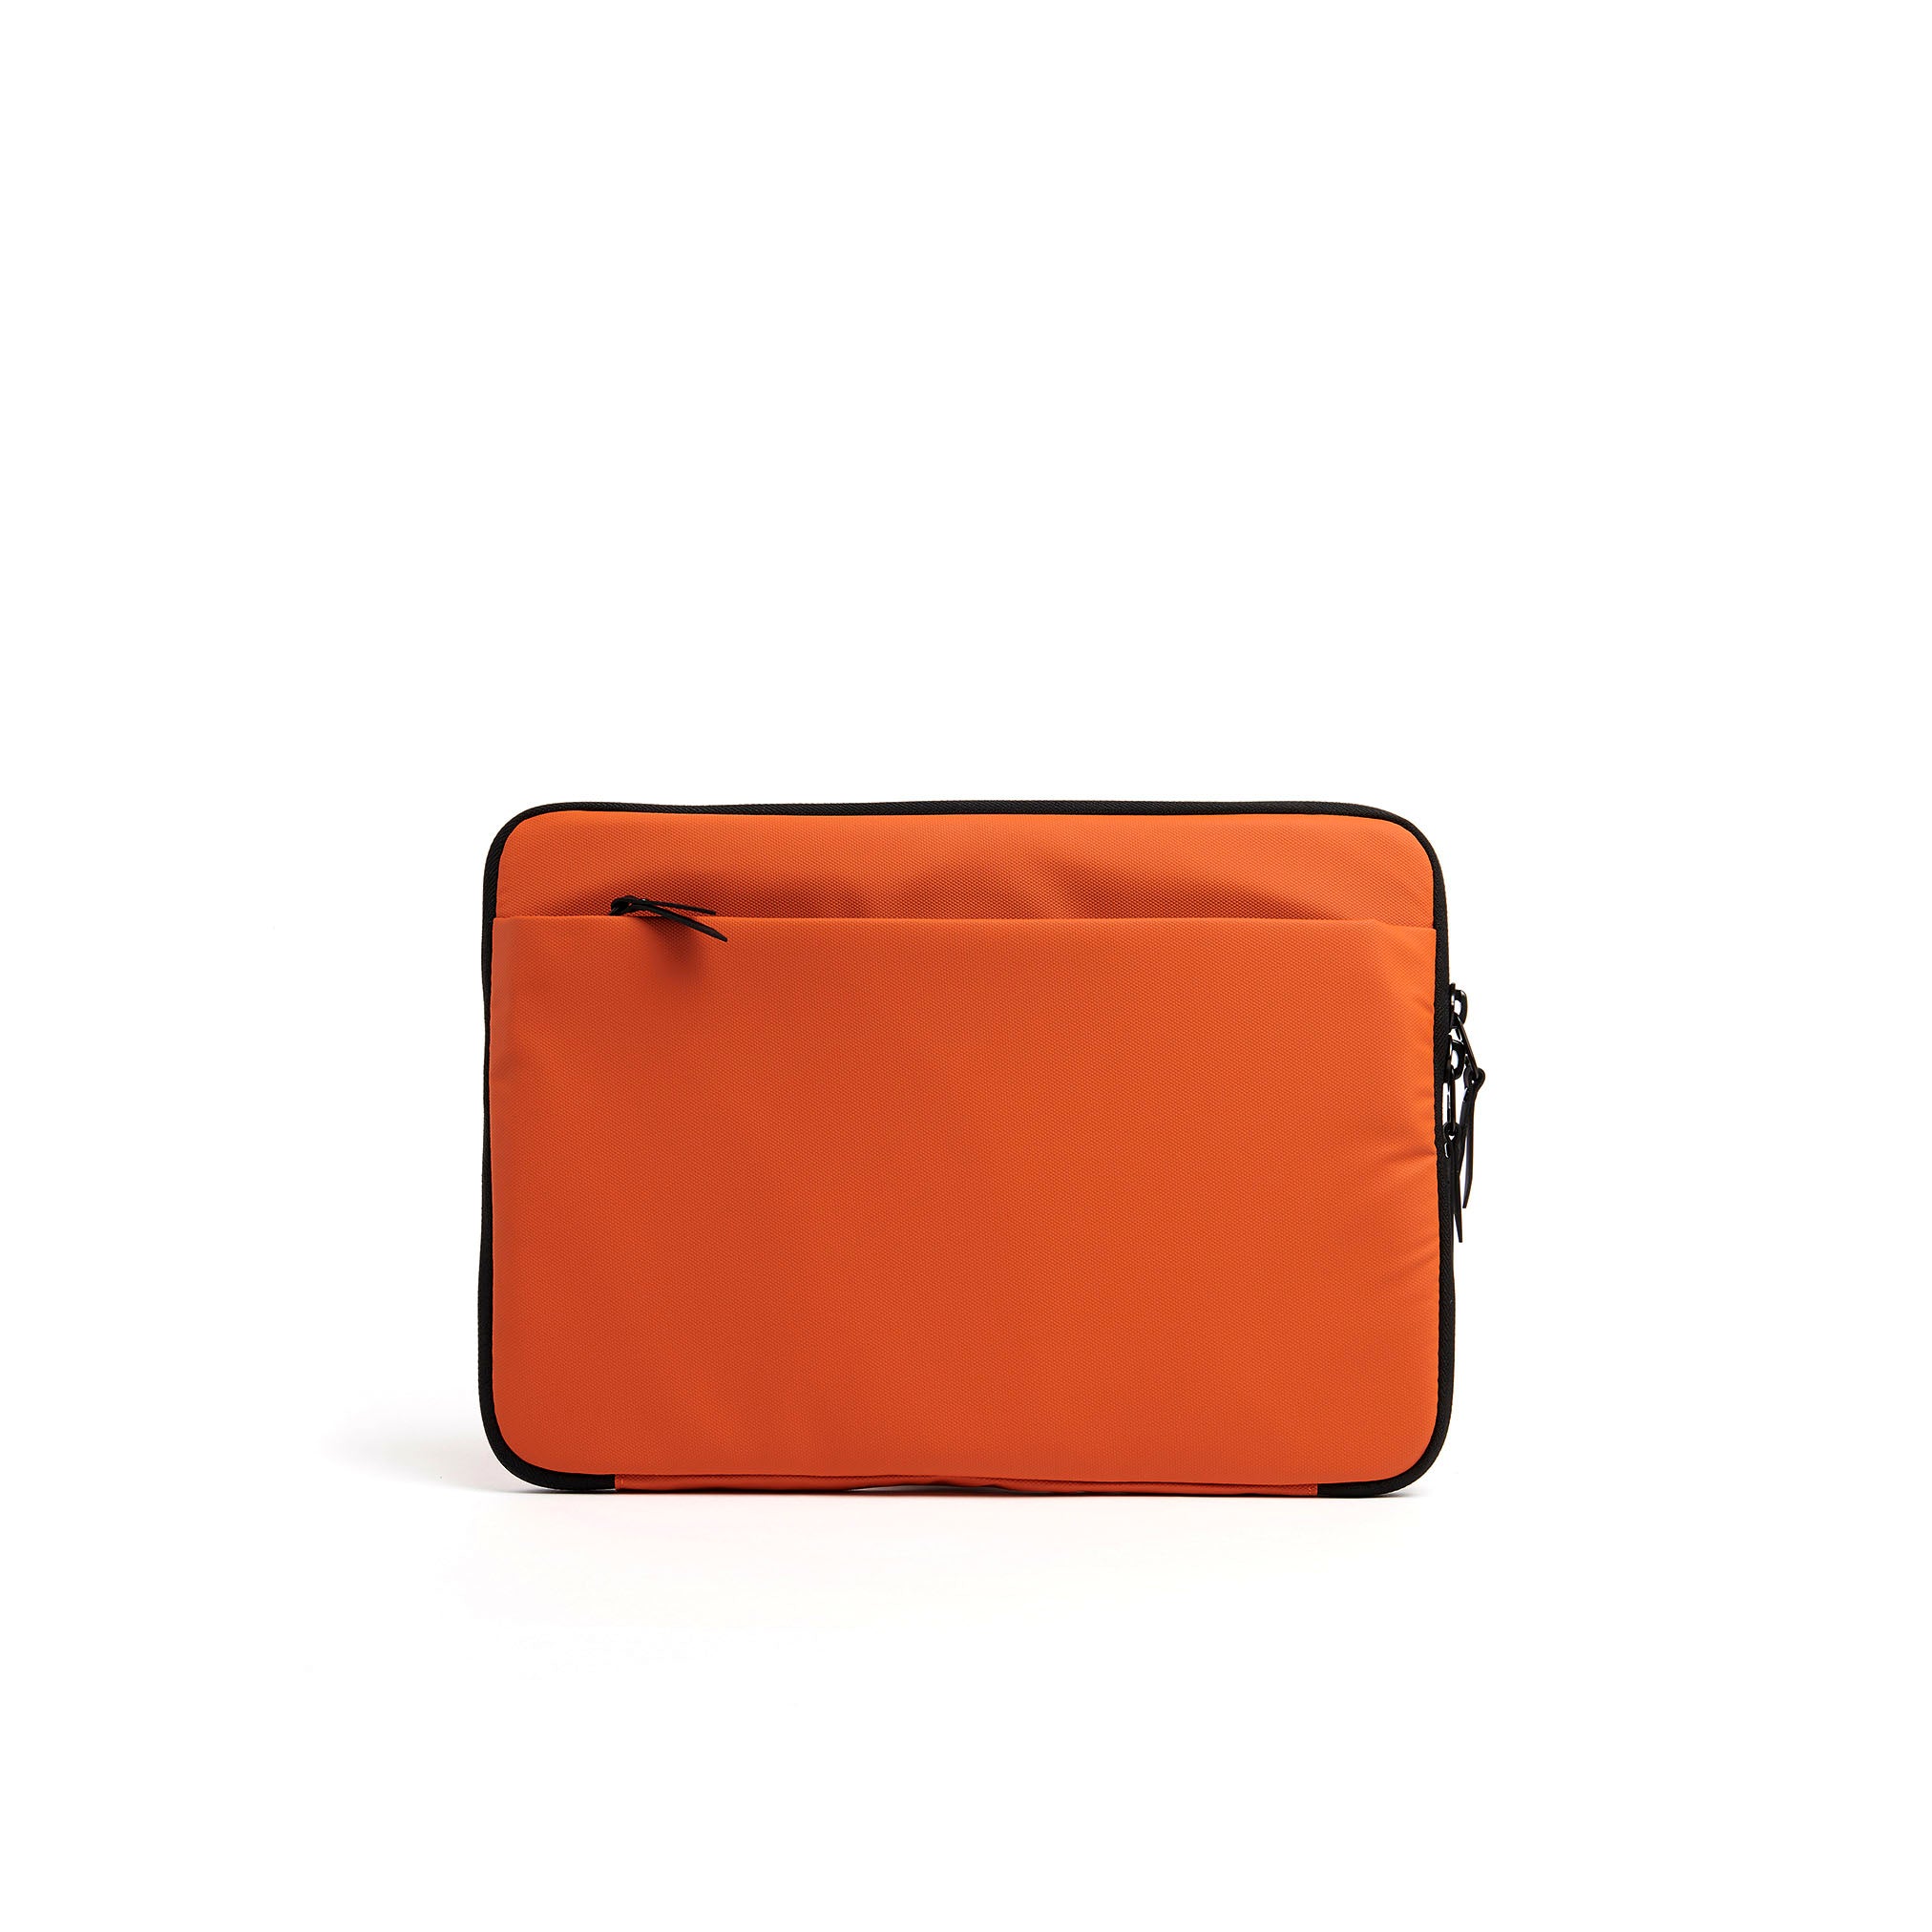 Mueslii A4 document- tech holder,  made of PU coated waterproof nylon, color burnt orange, back view.